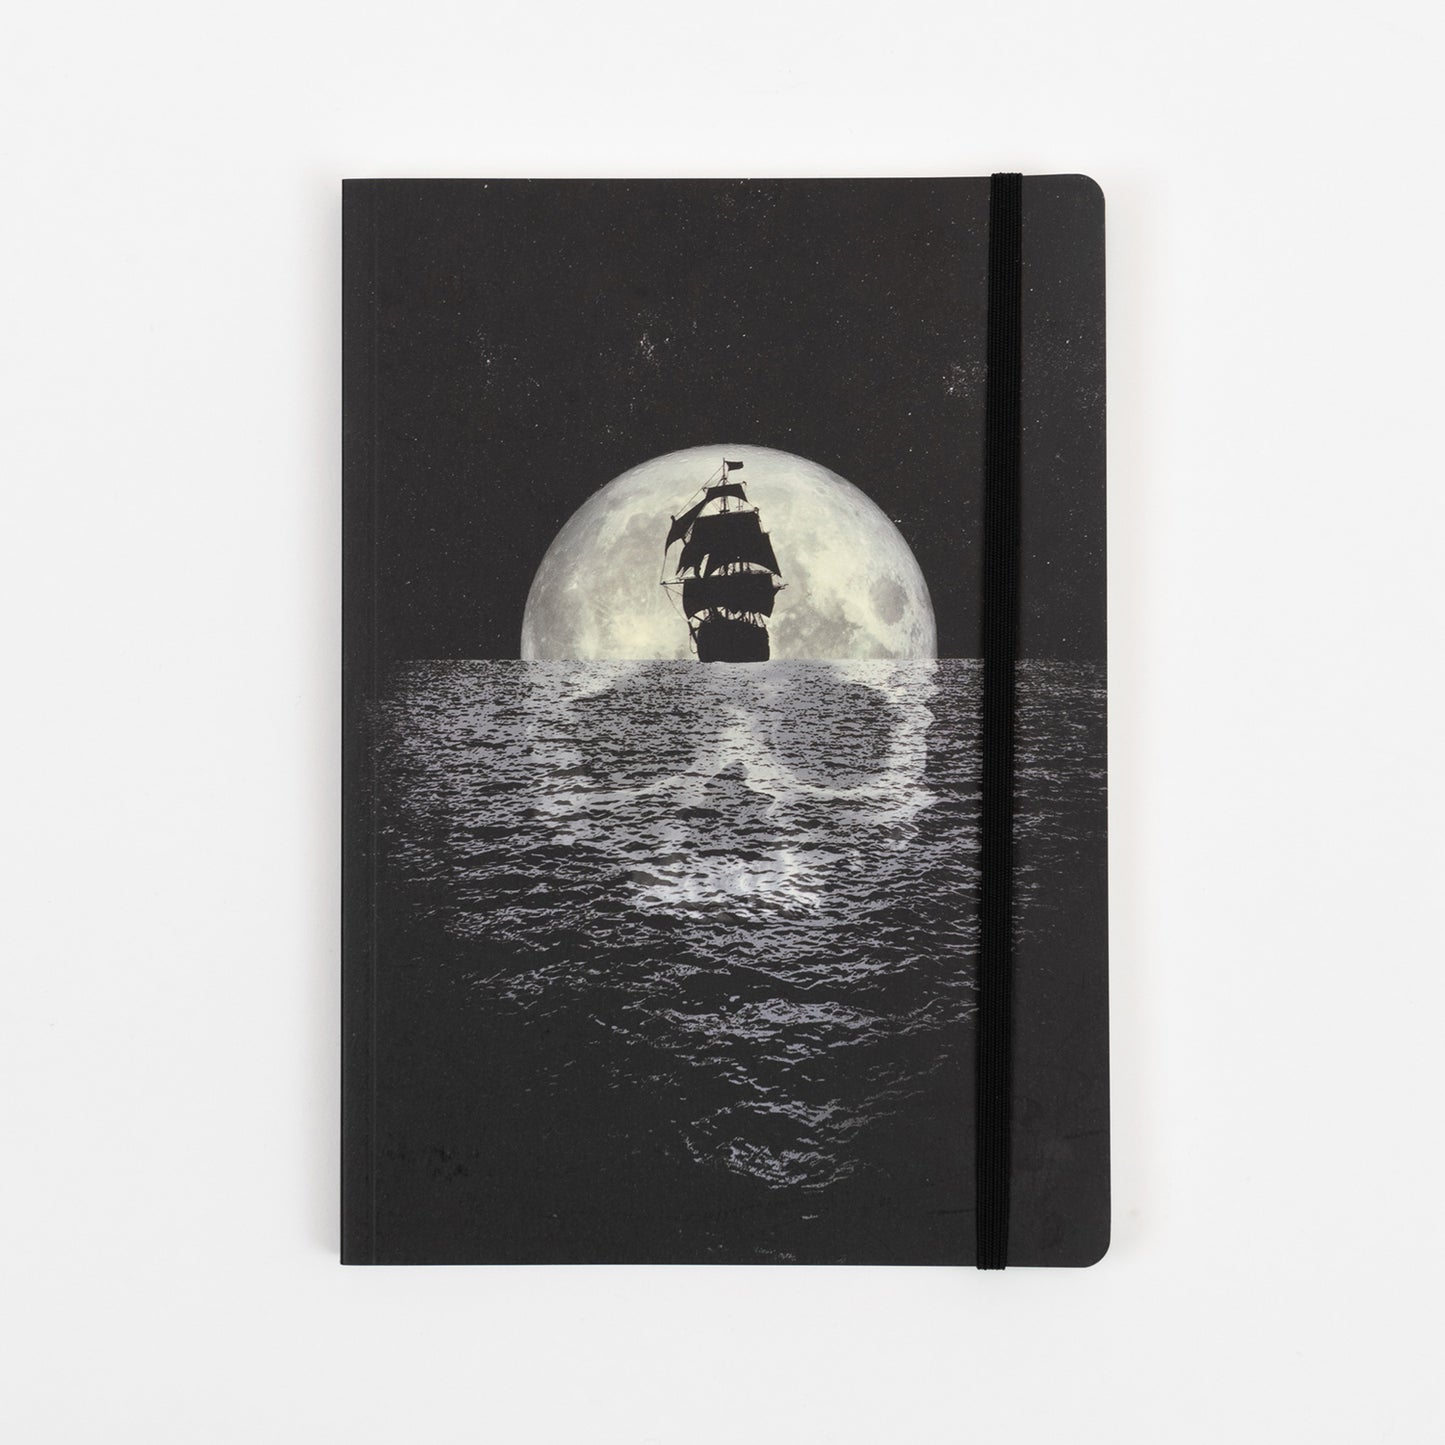 The black cover of the pirates journal with a illustration of a sailing ship in front of a moon and a skull reflection in the sea.